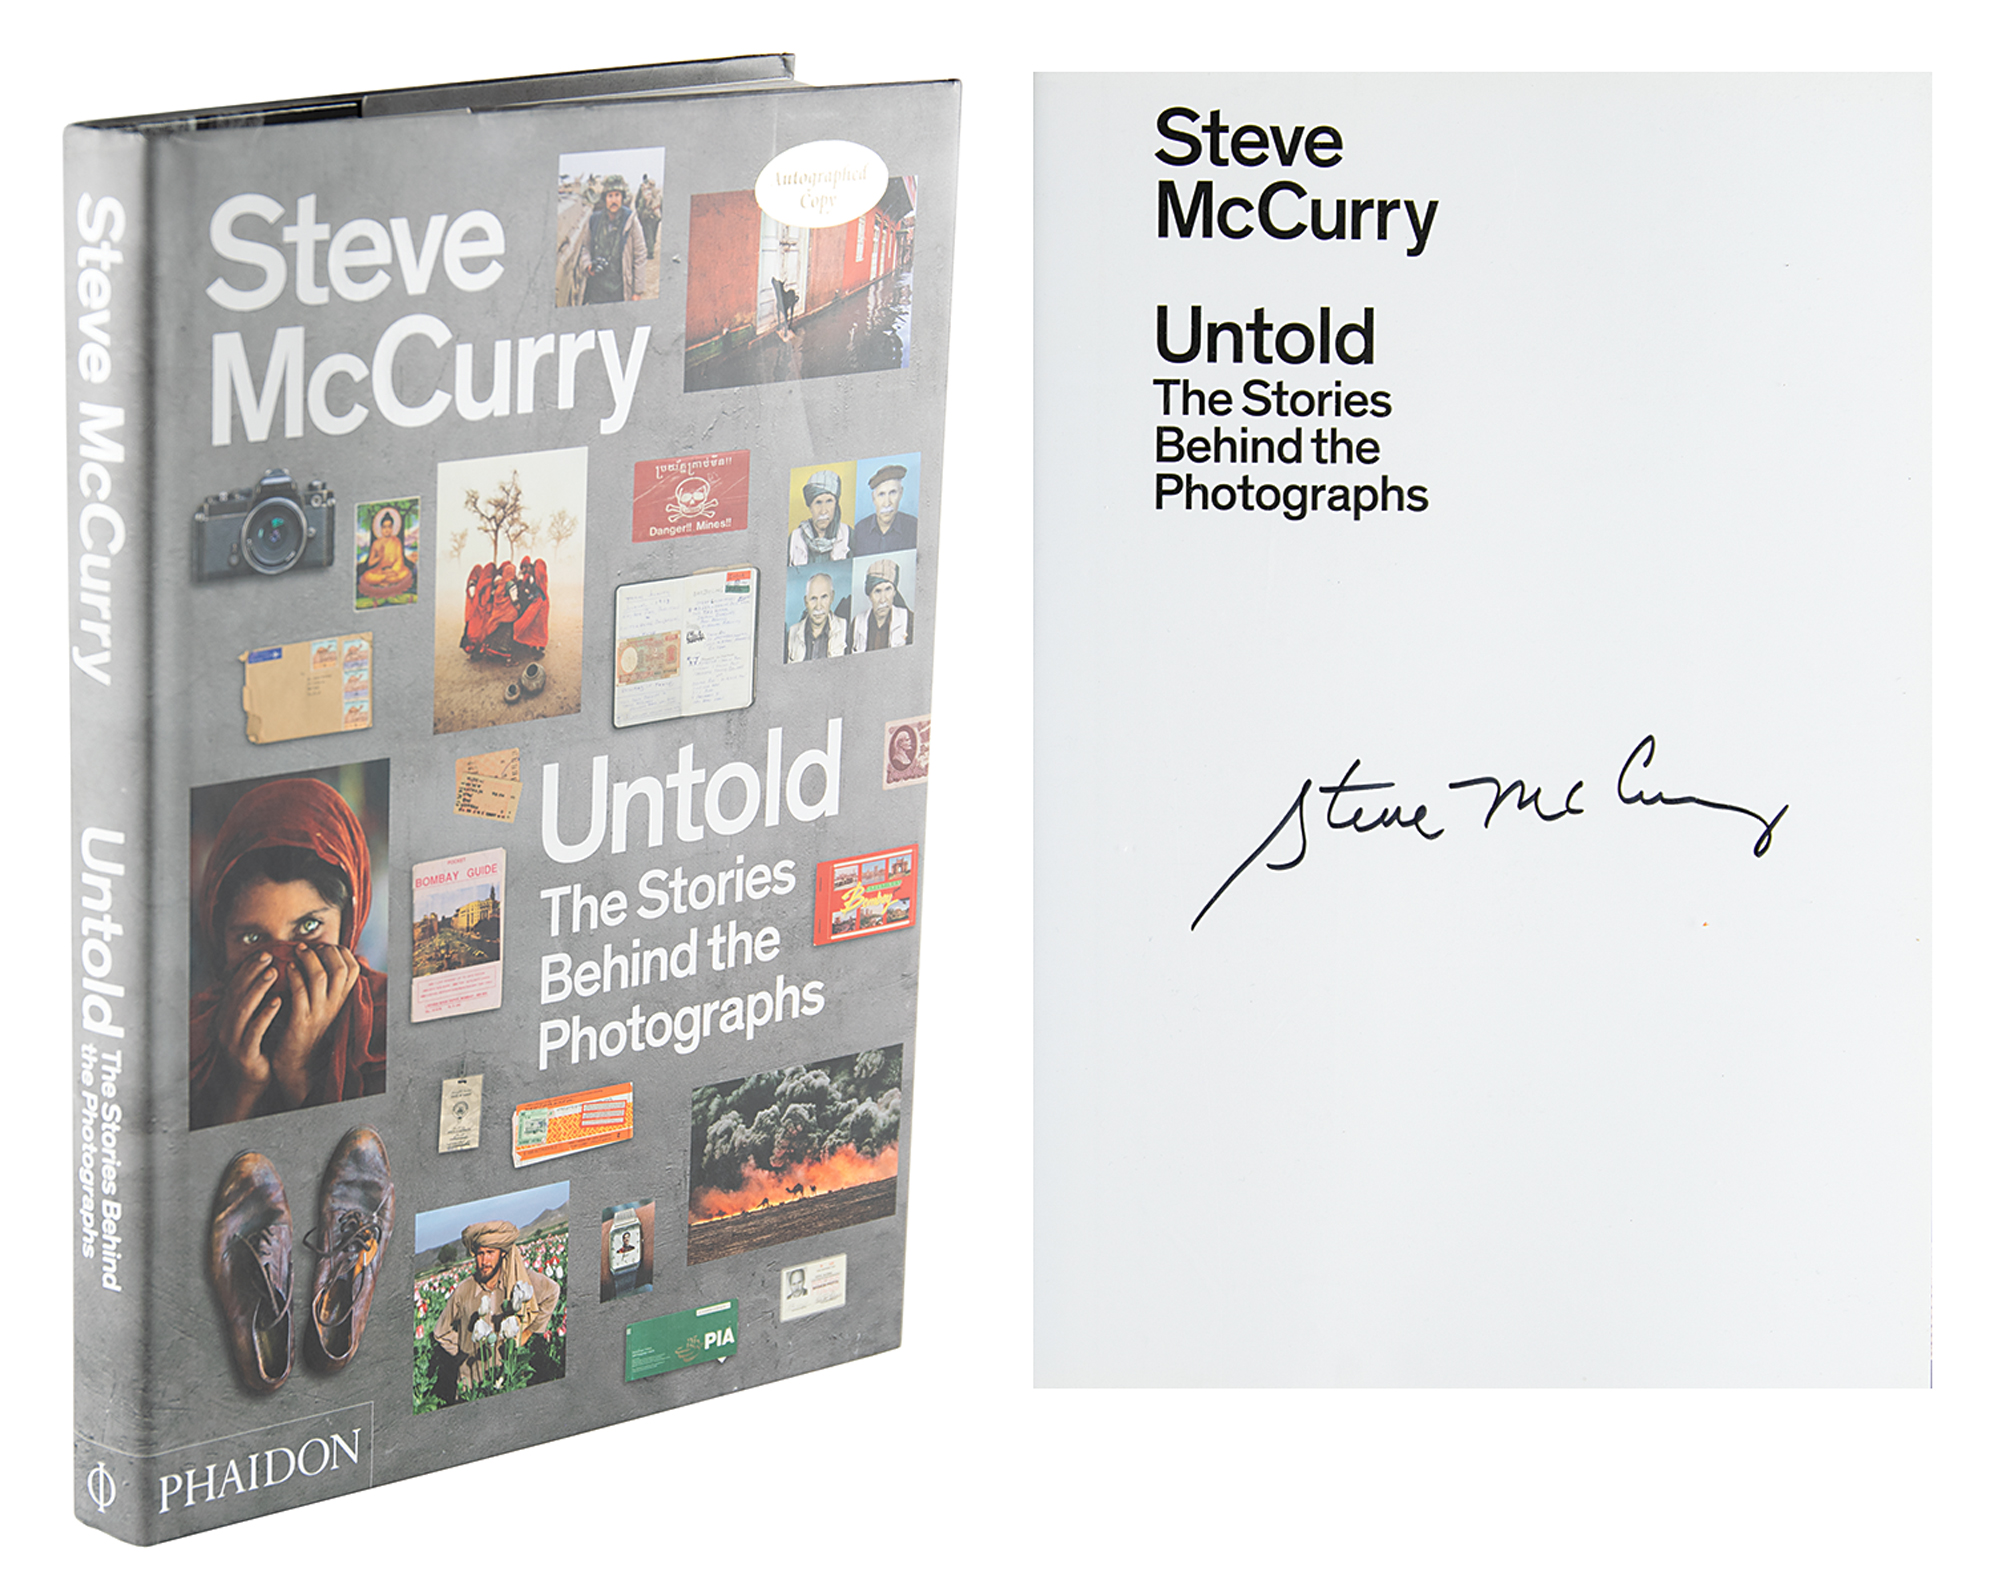 Lot #390 Steve McCurry Signed Book